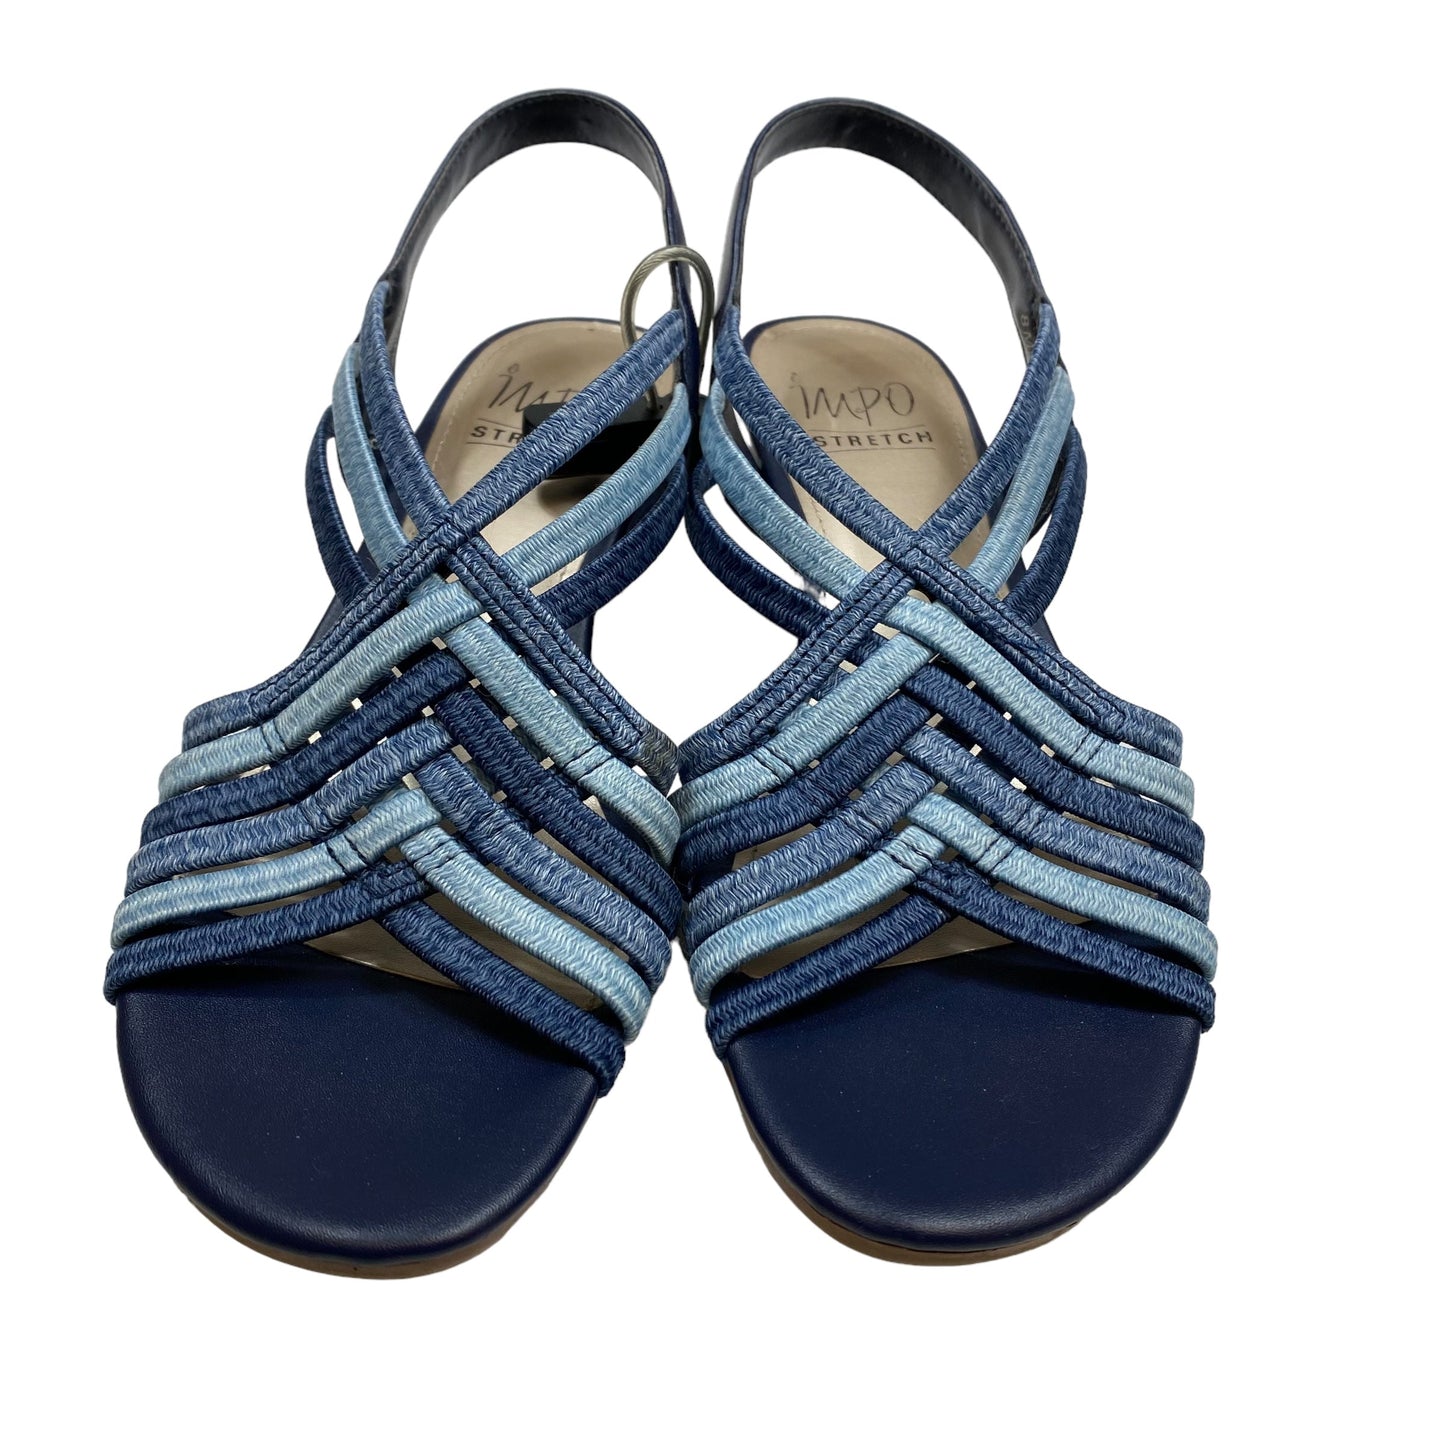 Blue Sandals Heels Wedge Impo, Size 8